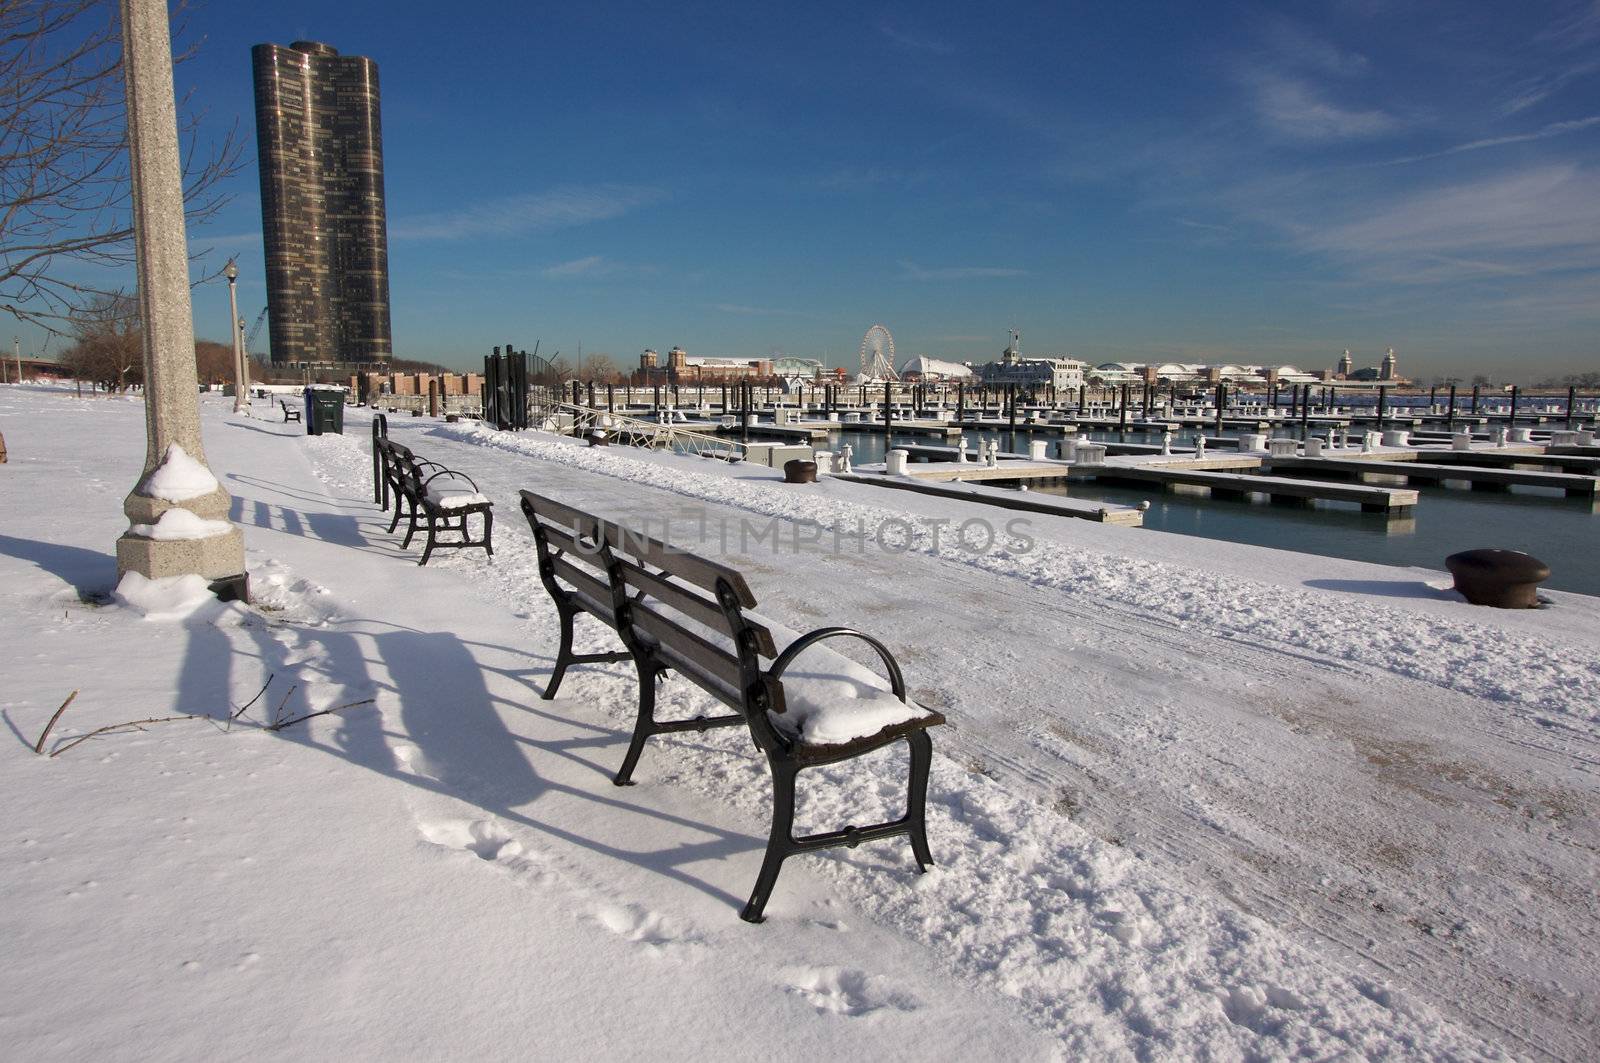 Empty Snowy Bench in Chicago After Winter Snow Along Lake Shore Drive.